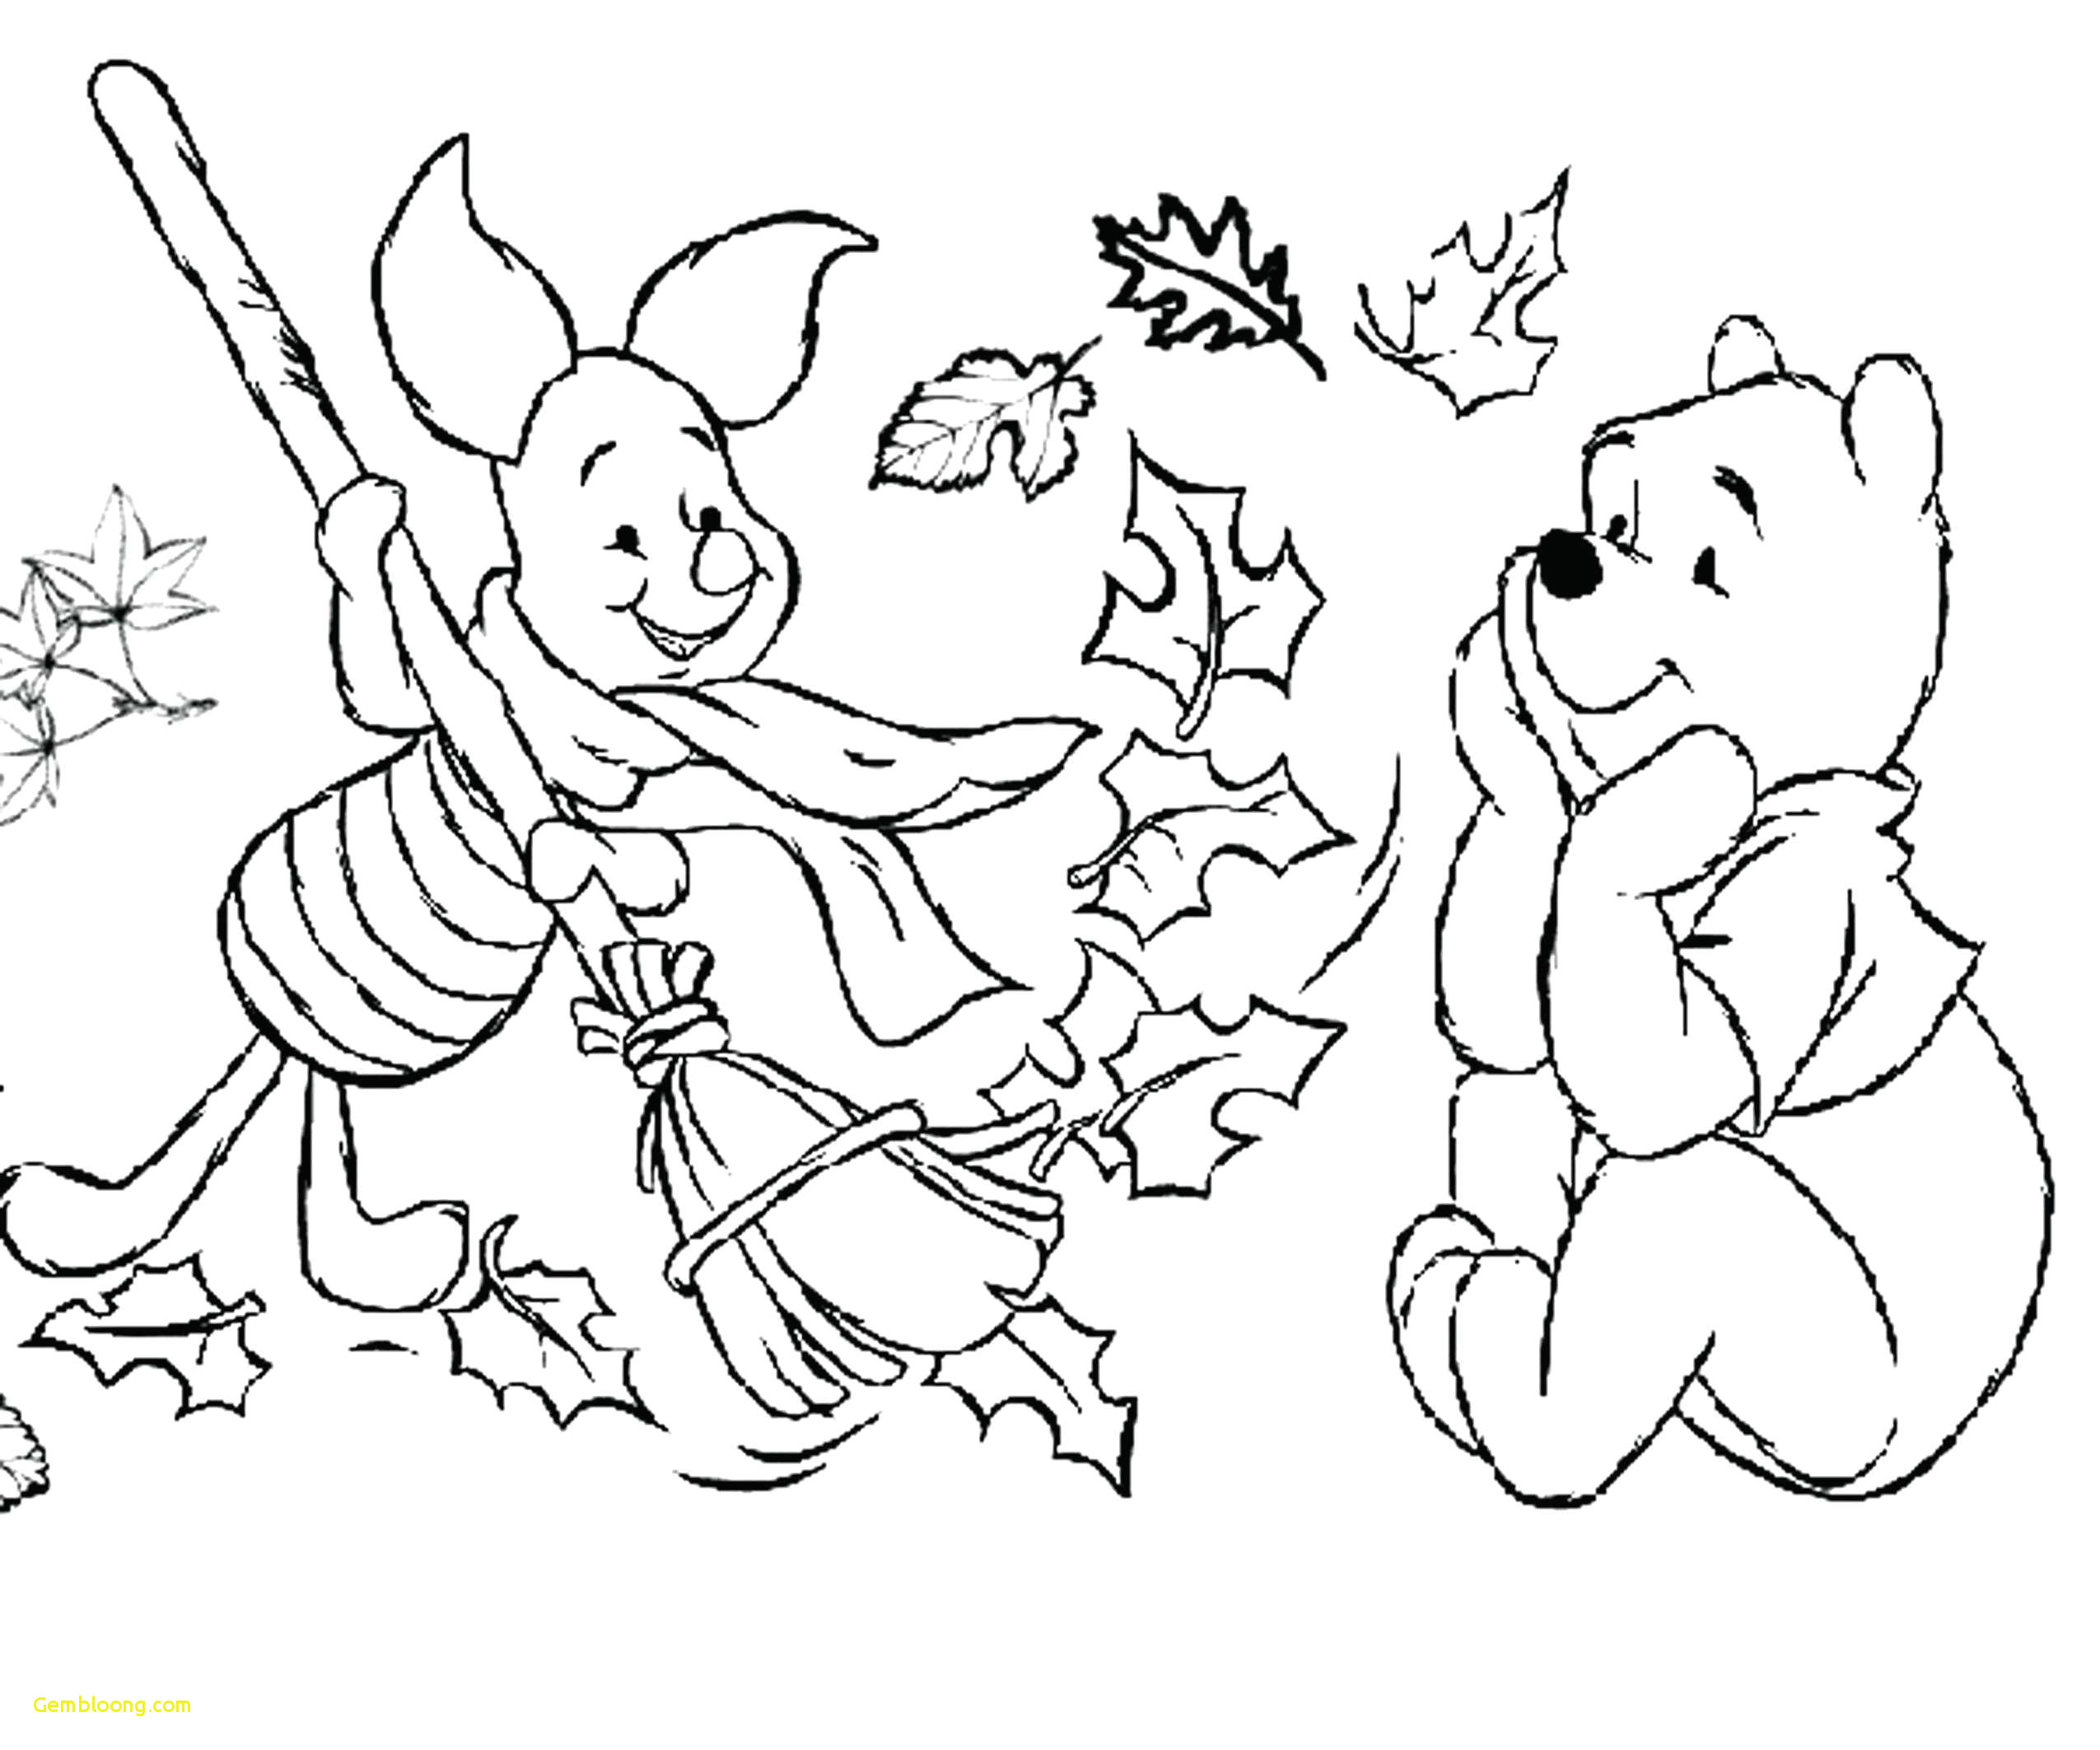 23 cartoons to draw natural simple cartoon house outline elegant coloring pages simple ghost of cartoons to draw jpg